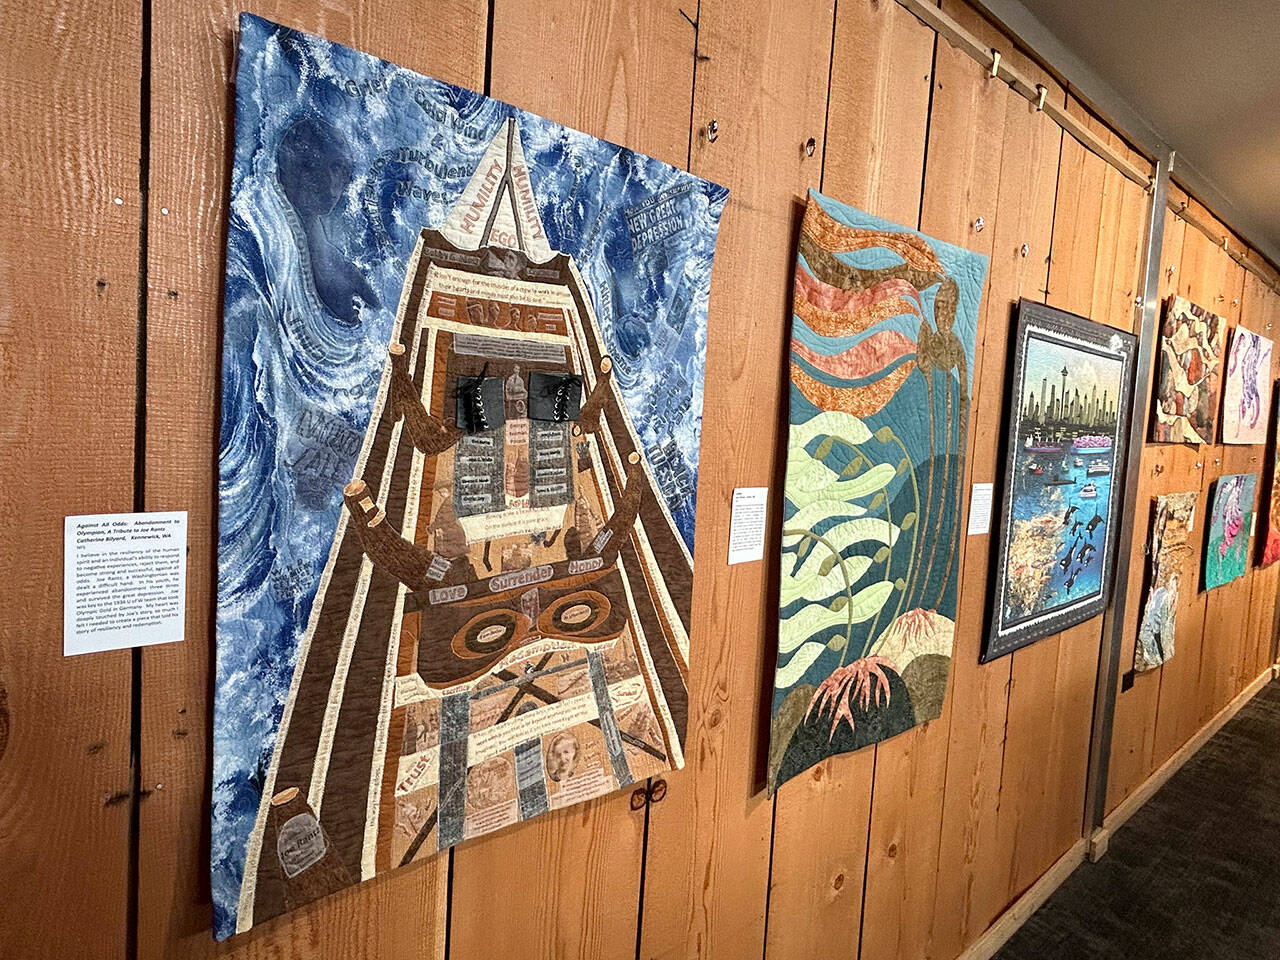 Sequim Gazette photo by Matthew Nash
“Against all Odds: Abandonment to Olympian, A Tribute to Joe Rantz” by Catherine Bilyard is one of 41 quilts on display in Sequim Museum & Arts through the end of March as part of the “Inspiration/Exploration” exhibit.